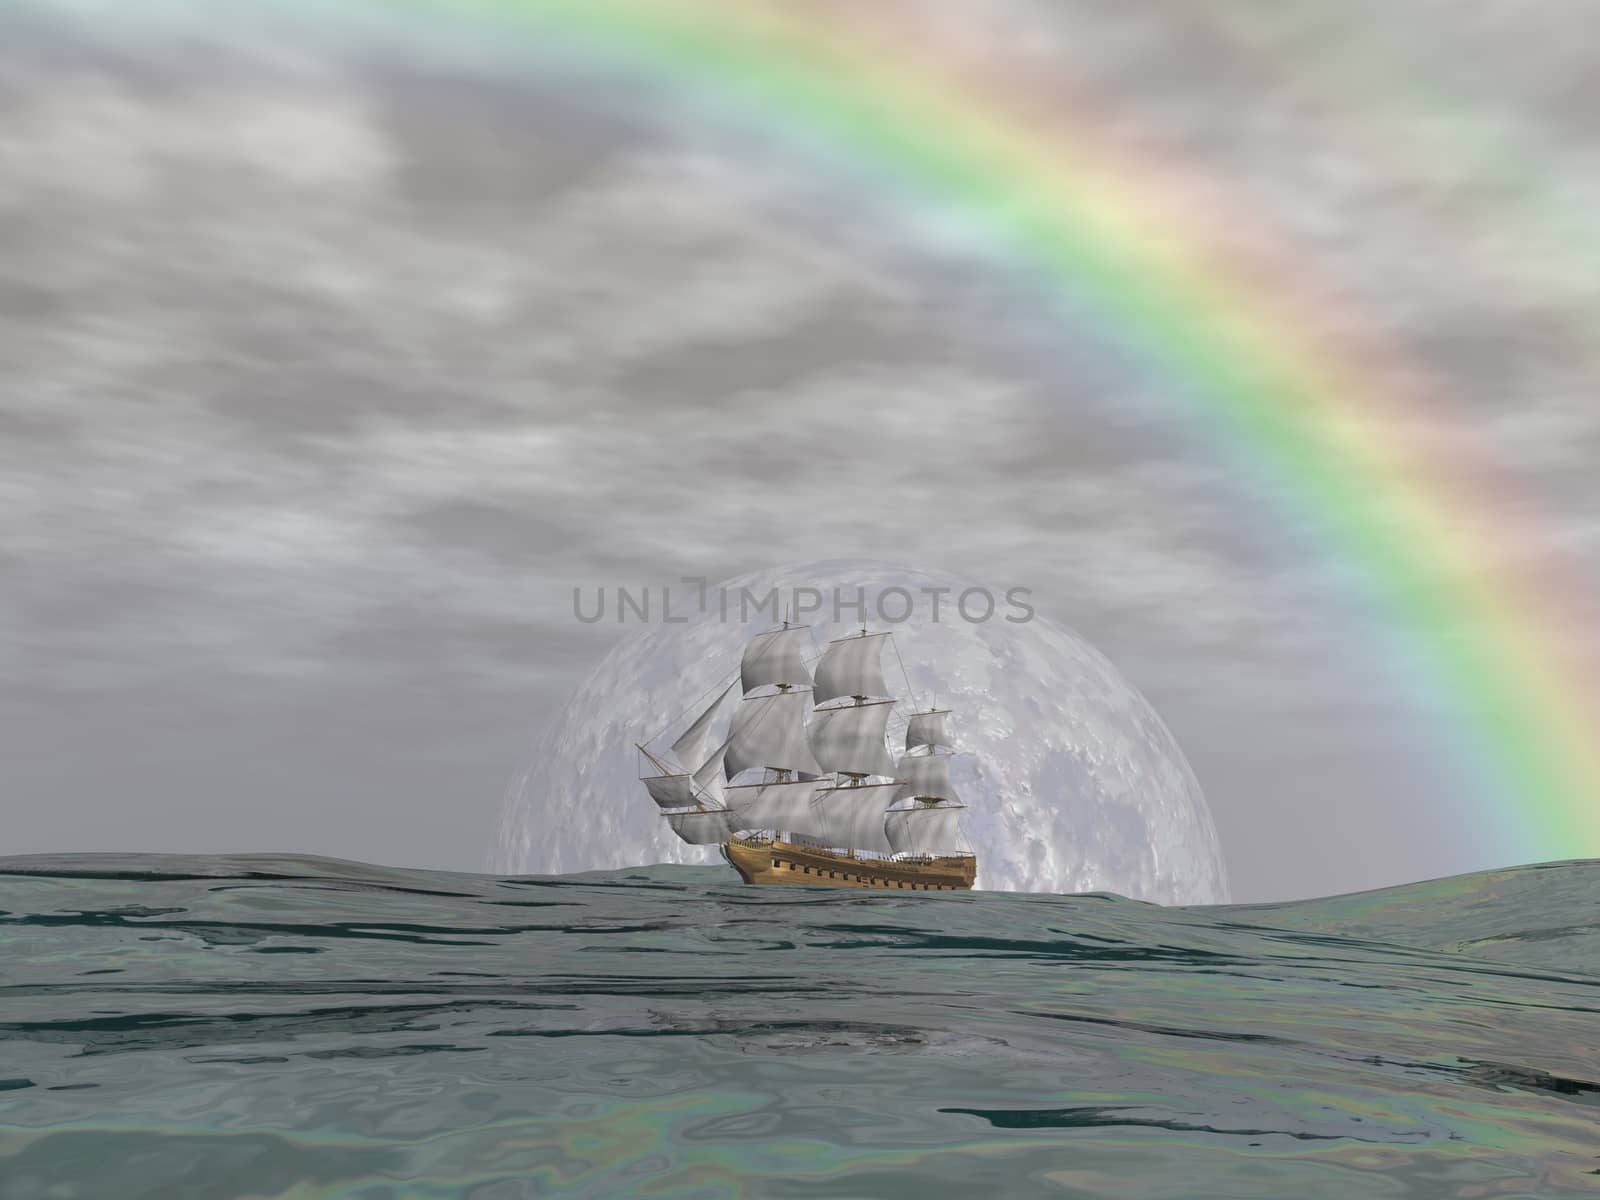 Old merchant ship under the rainbow on the ocean by cloudy day - 3D render